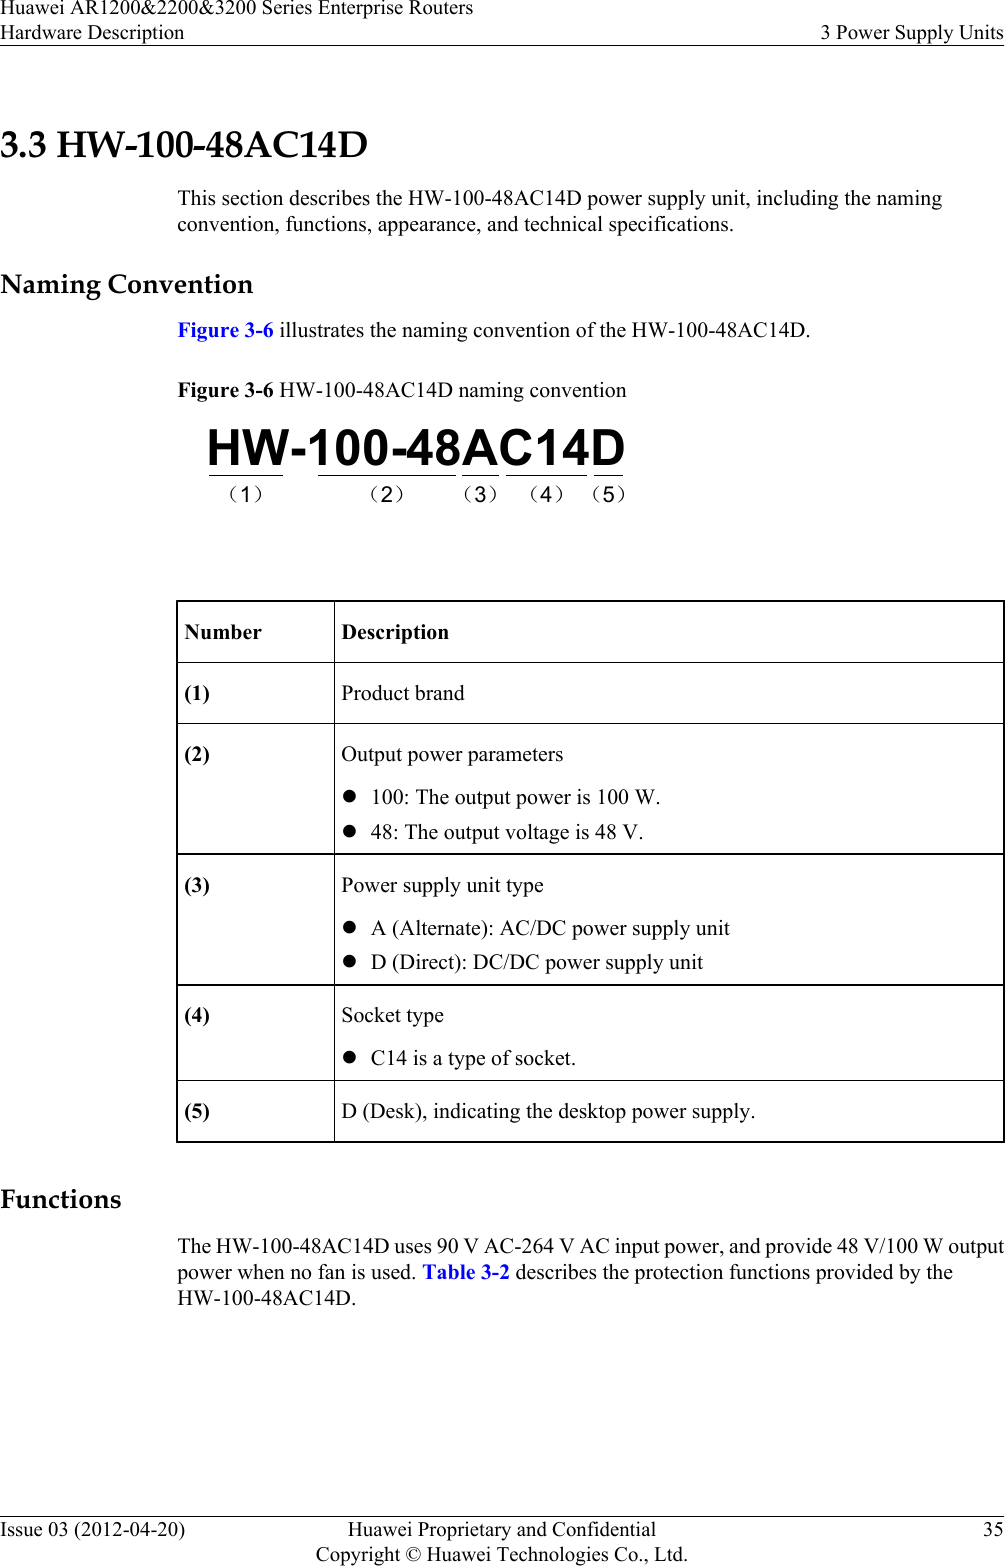 3.3 HW-100-48AC14DThis section describes the HW-100-48AC14D power supply unit, including the namingconvention, functions, appearance, and technical specifications.Naming ConventionFigure 3-6 illustrates the naming convention of the HW-100-48AC14D.Figure 3-6 HW-100-48AC14D naming conventionHW-100-48AC14D（1） （2） （3） （4） （5） Number Description(1) Product brand(2) Output power parametersl100: The output power is 100 W.l48: The output voltage is 48 V.(3) Power supply unit typelA (Alternate): AC/DC power supply unitlD (Direct): DC/DC power supply unit(4) Socket typelC14 is a type of socket.(5) D (Desk), indicating the desktop power supply.FunctionsThe HW-100-48AC14D uses 90 V AC-264 V AC input power, and provide 48 V/100 W outputpower when no fan is used. Table 3-2 describes the protection functions provided by theHW-100-48AC14D.Huawei AR1200&amp;2200&amp;3200 Series Enterprise RoutersHardware Description 3 Power Supply UnitsIssue 03 (2012-04-20) Huawei Proprietary and ConfidentialCopyright © Huawei Technologies Co., Ltd.35